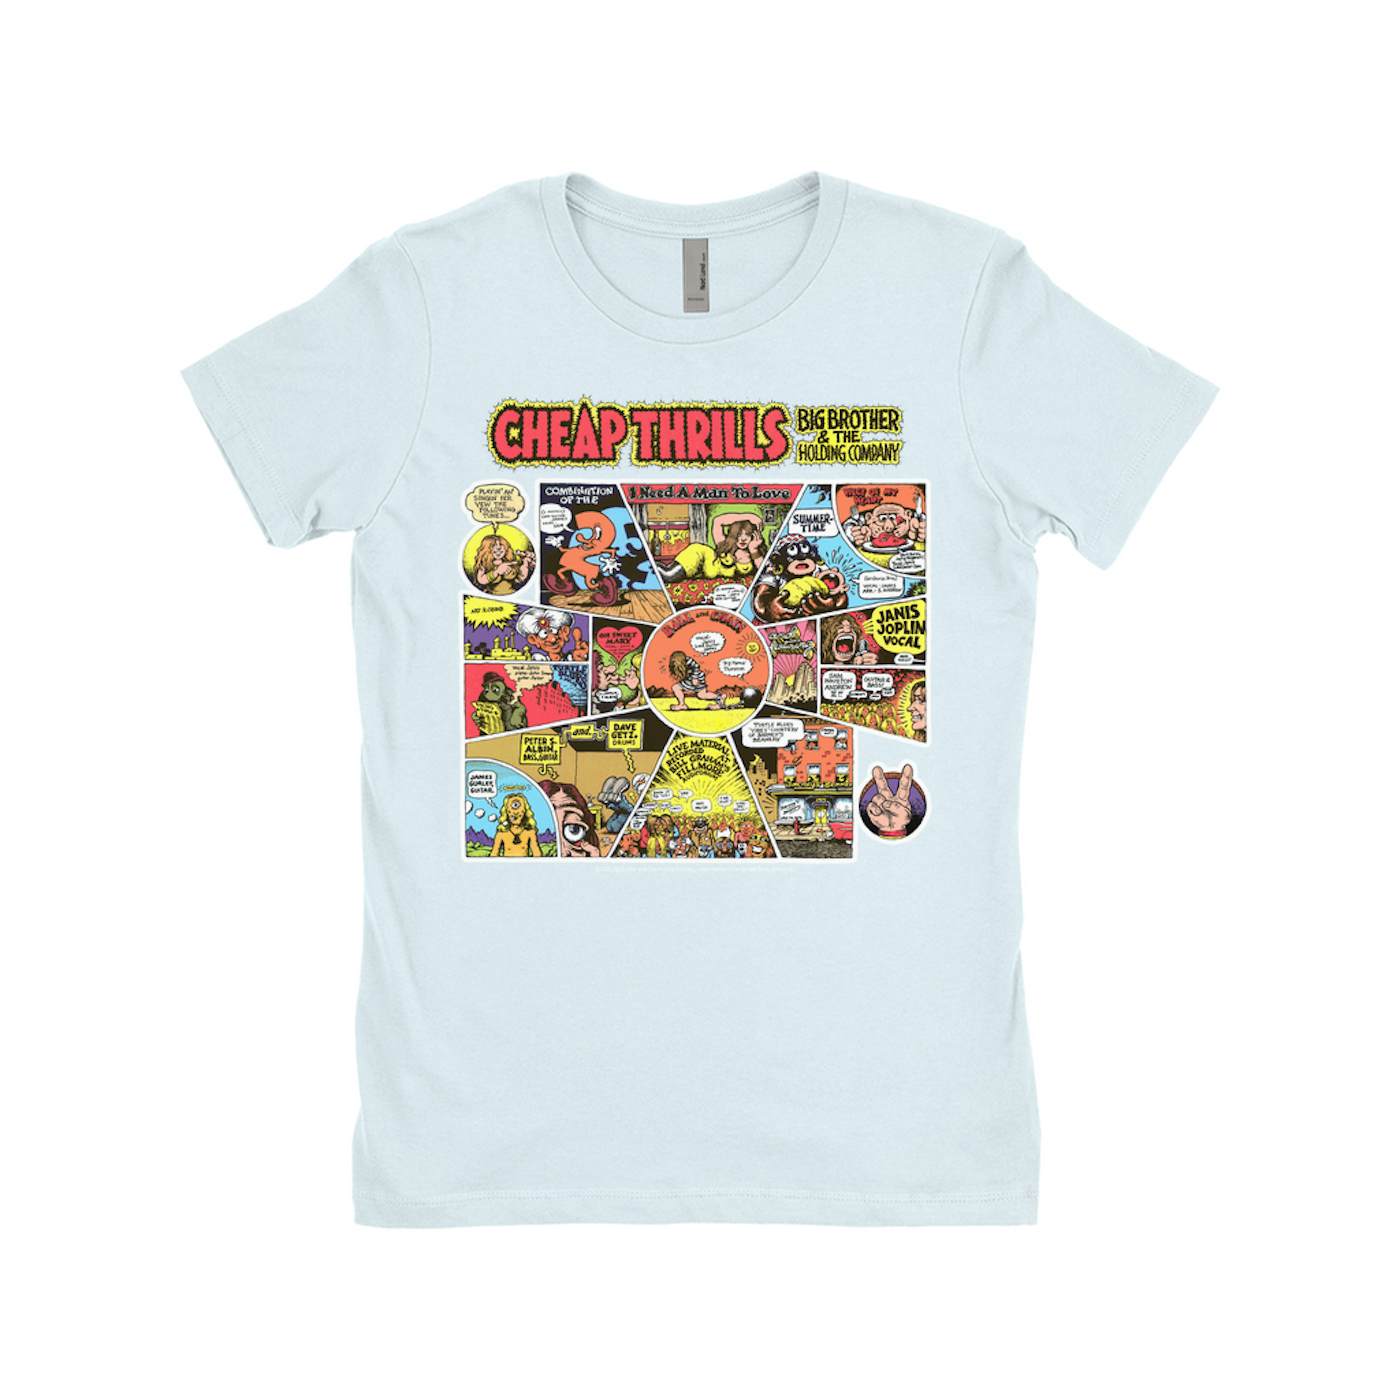 Big Brother & The Holding Company Ladies' Boyfriend T-Shirt | Cheap Thrills Album Cover Big Brother and The Holding Company Shirt